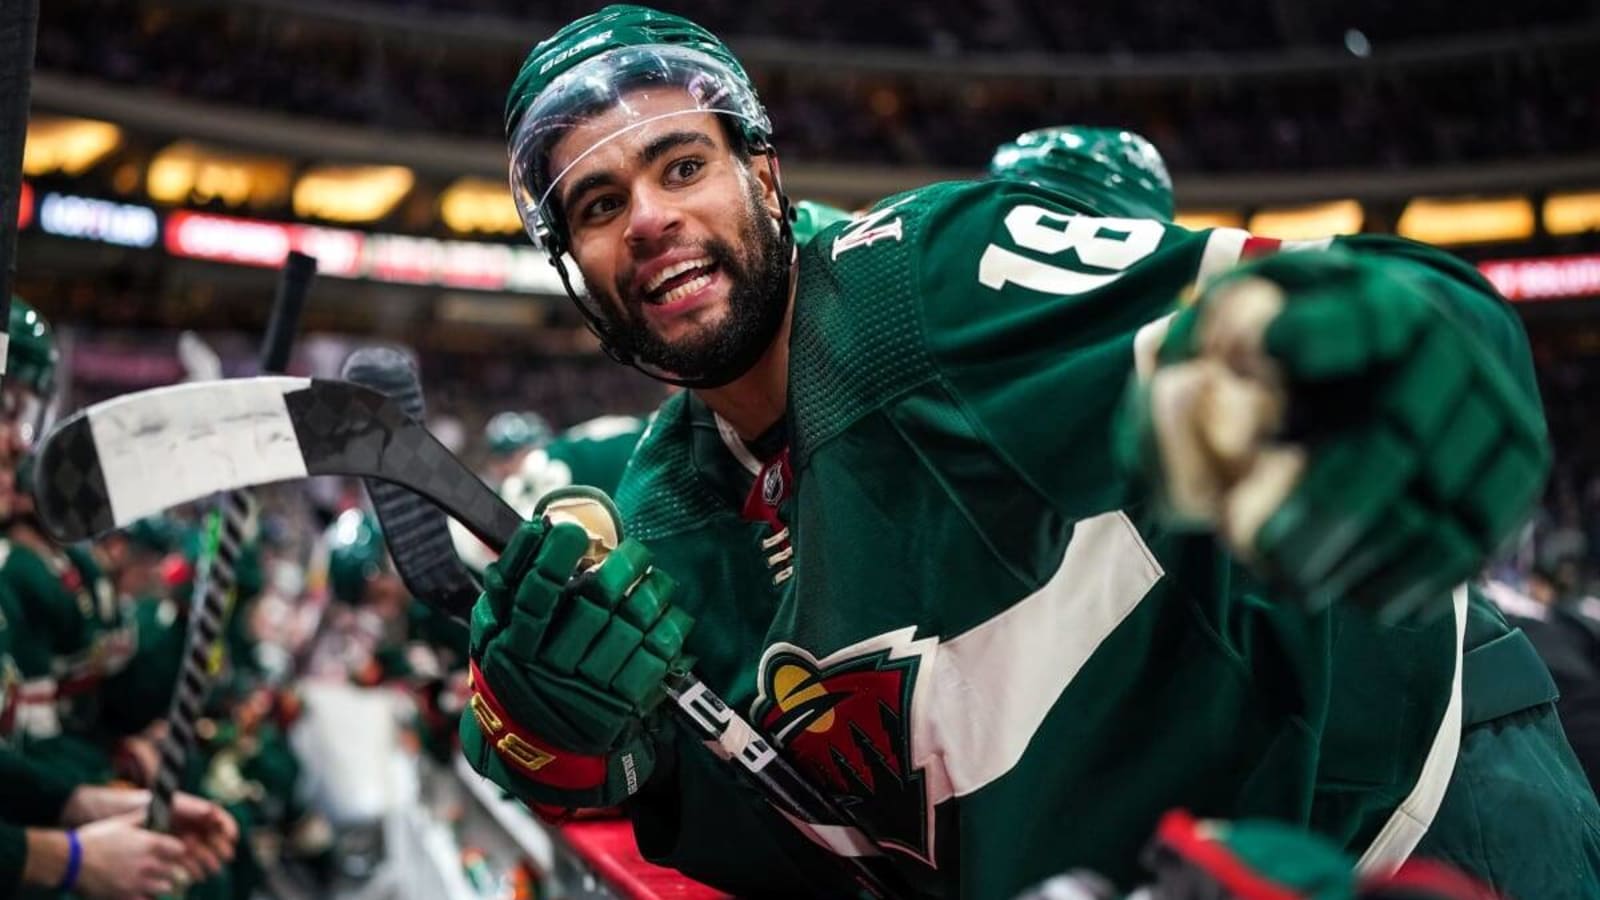 Jordan Greenway injured in first game back with Wild